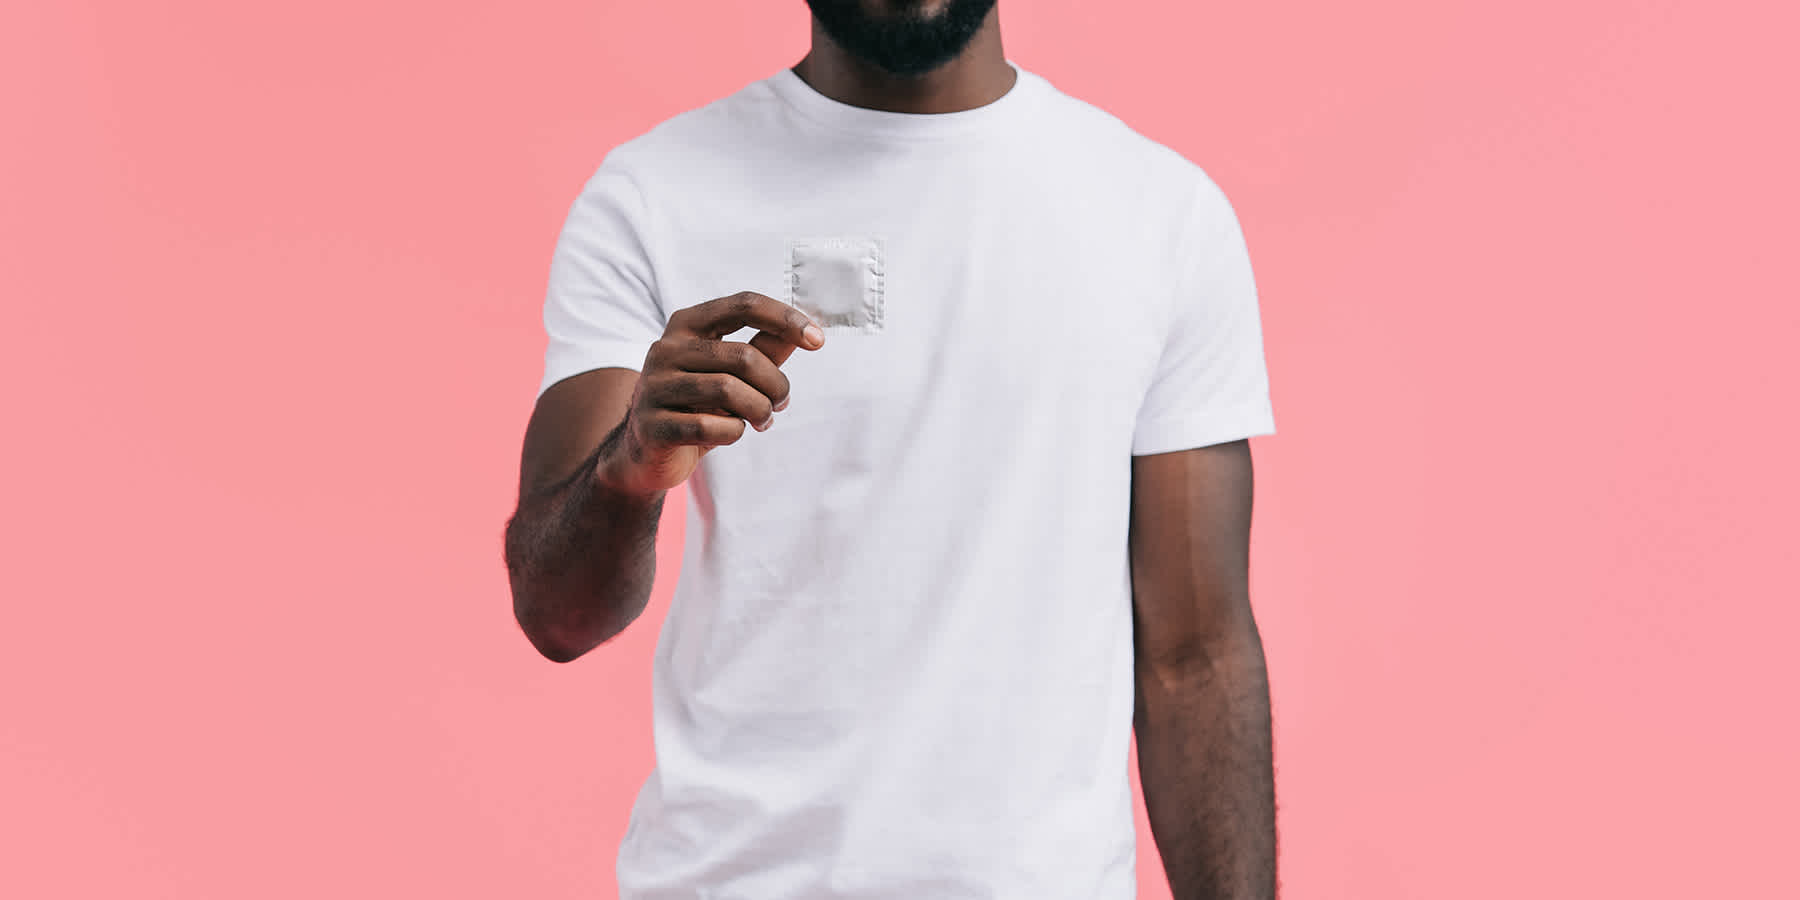 Man against a pink background holding a condom and wondering if a UTI can be transmitted through sex